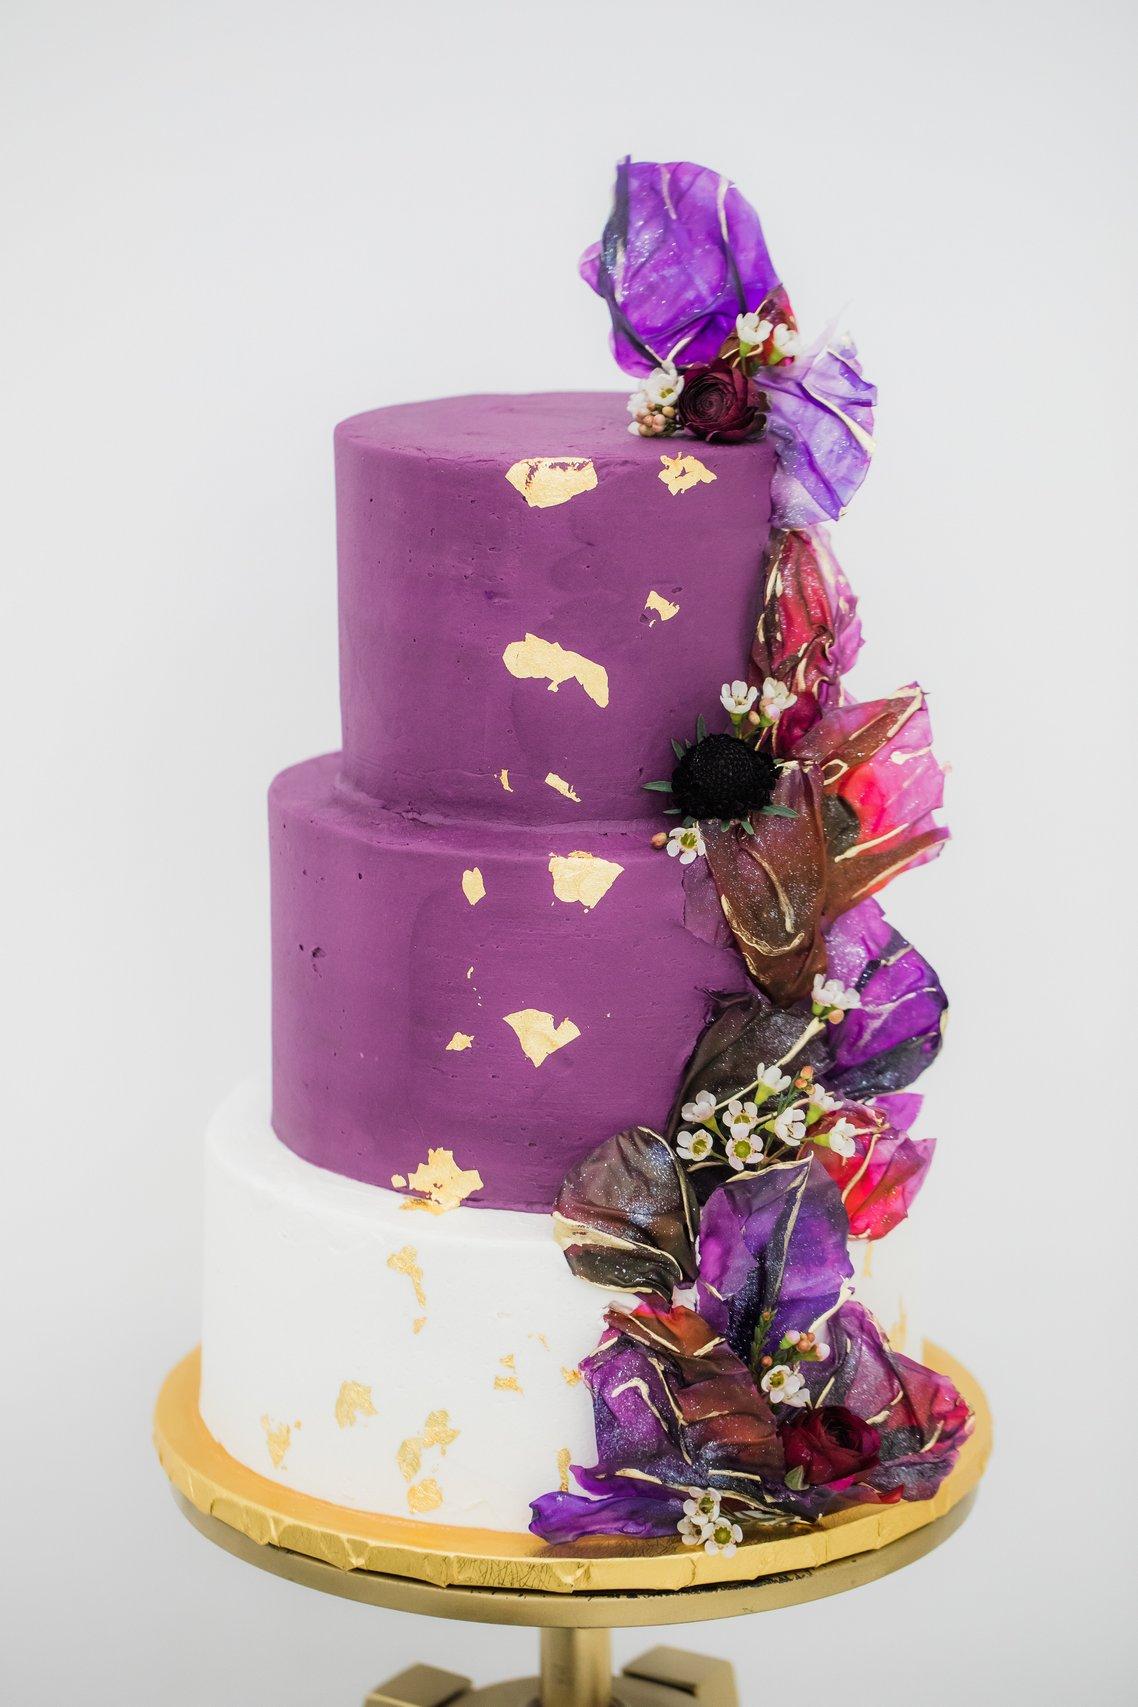 Premium Photo | A chocolate cake with a purple and yellow center and purple  decorations on the top.